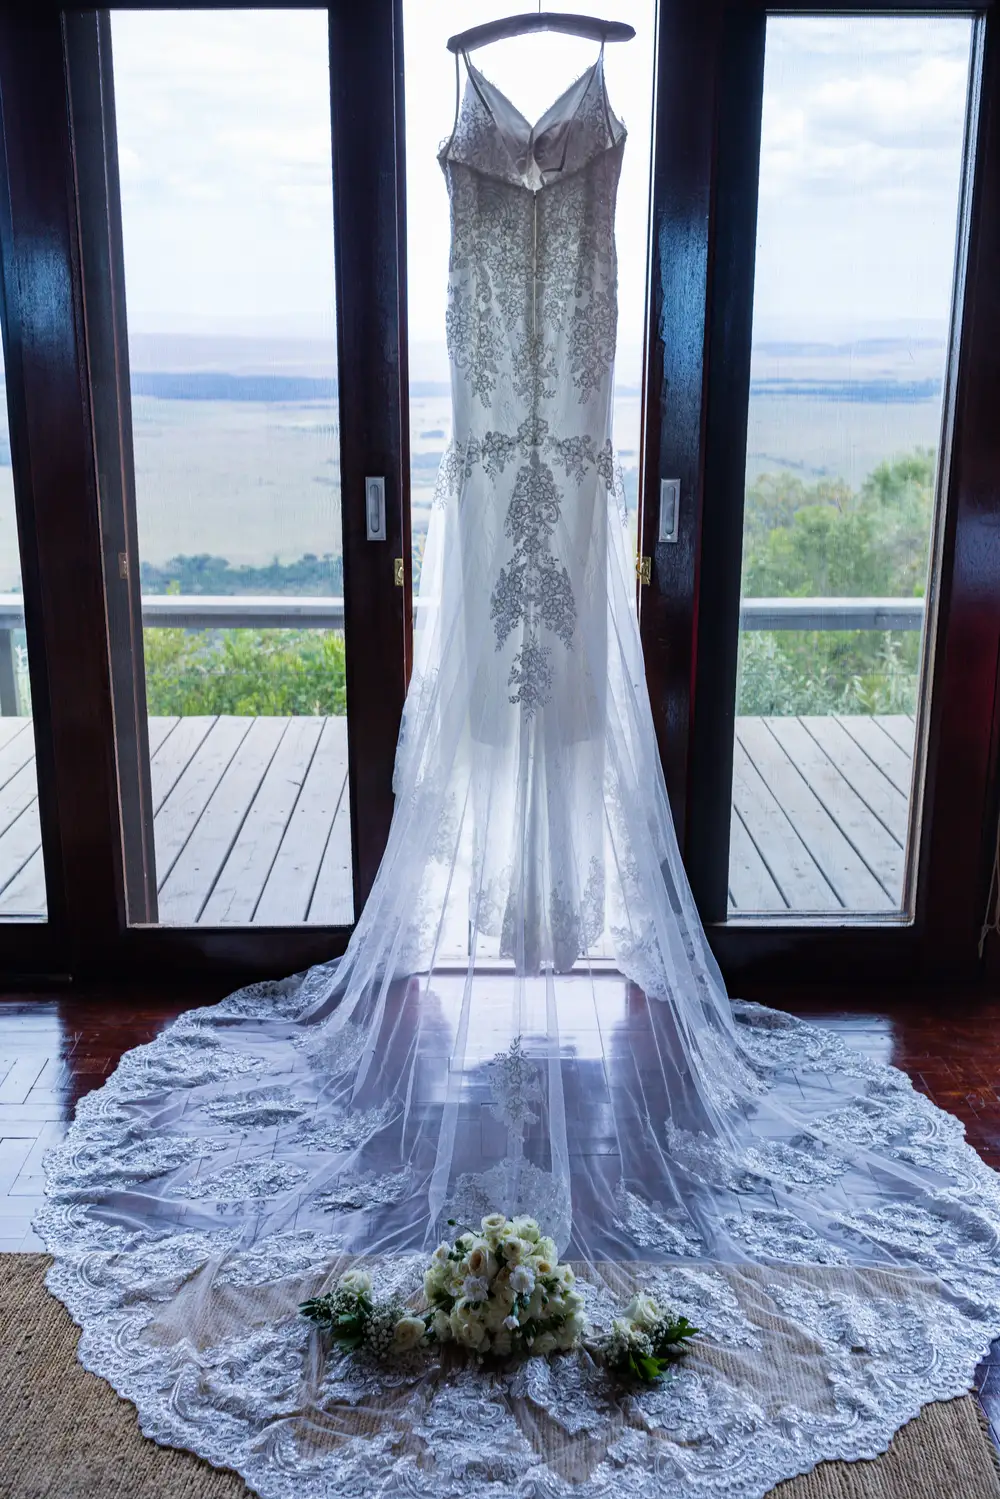 Patterned White dress in a room with glass windows